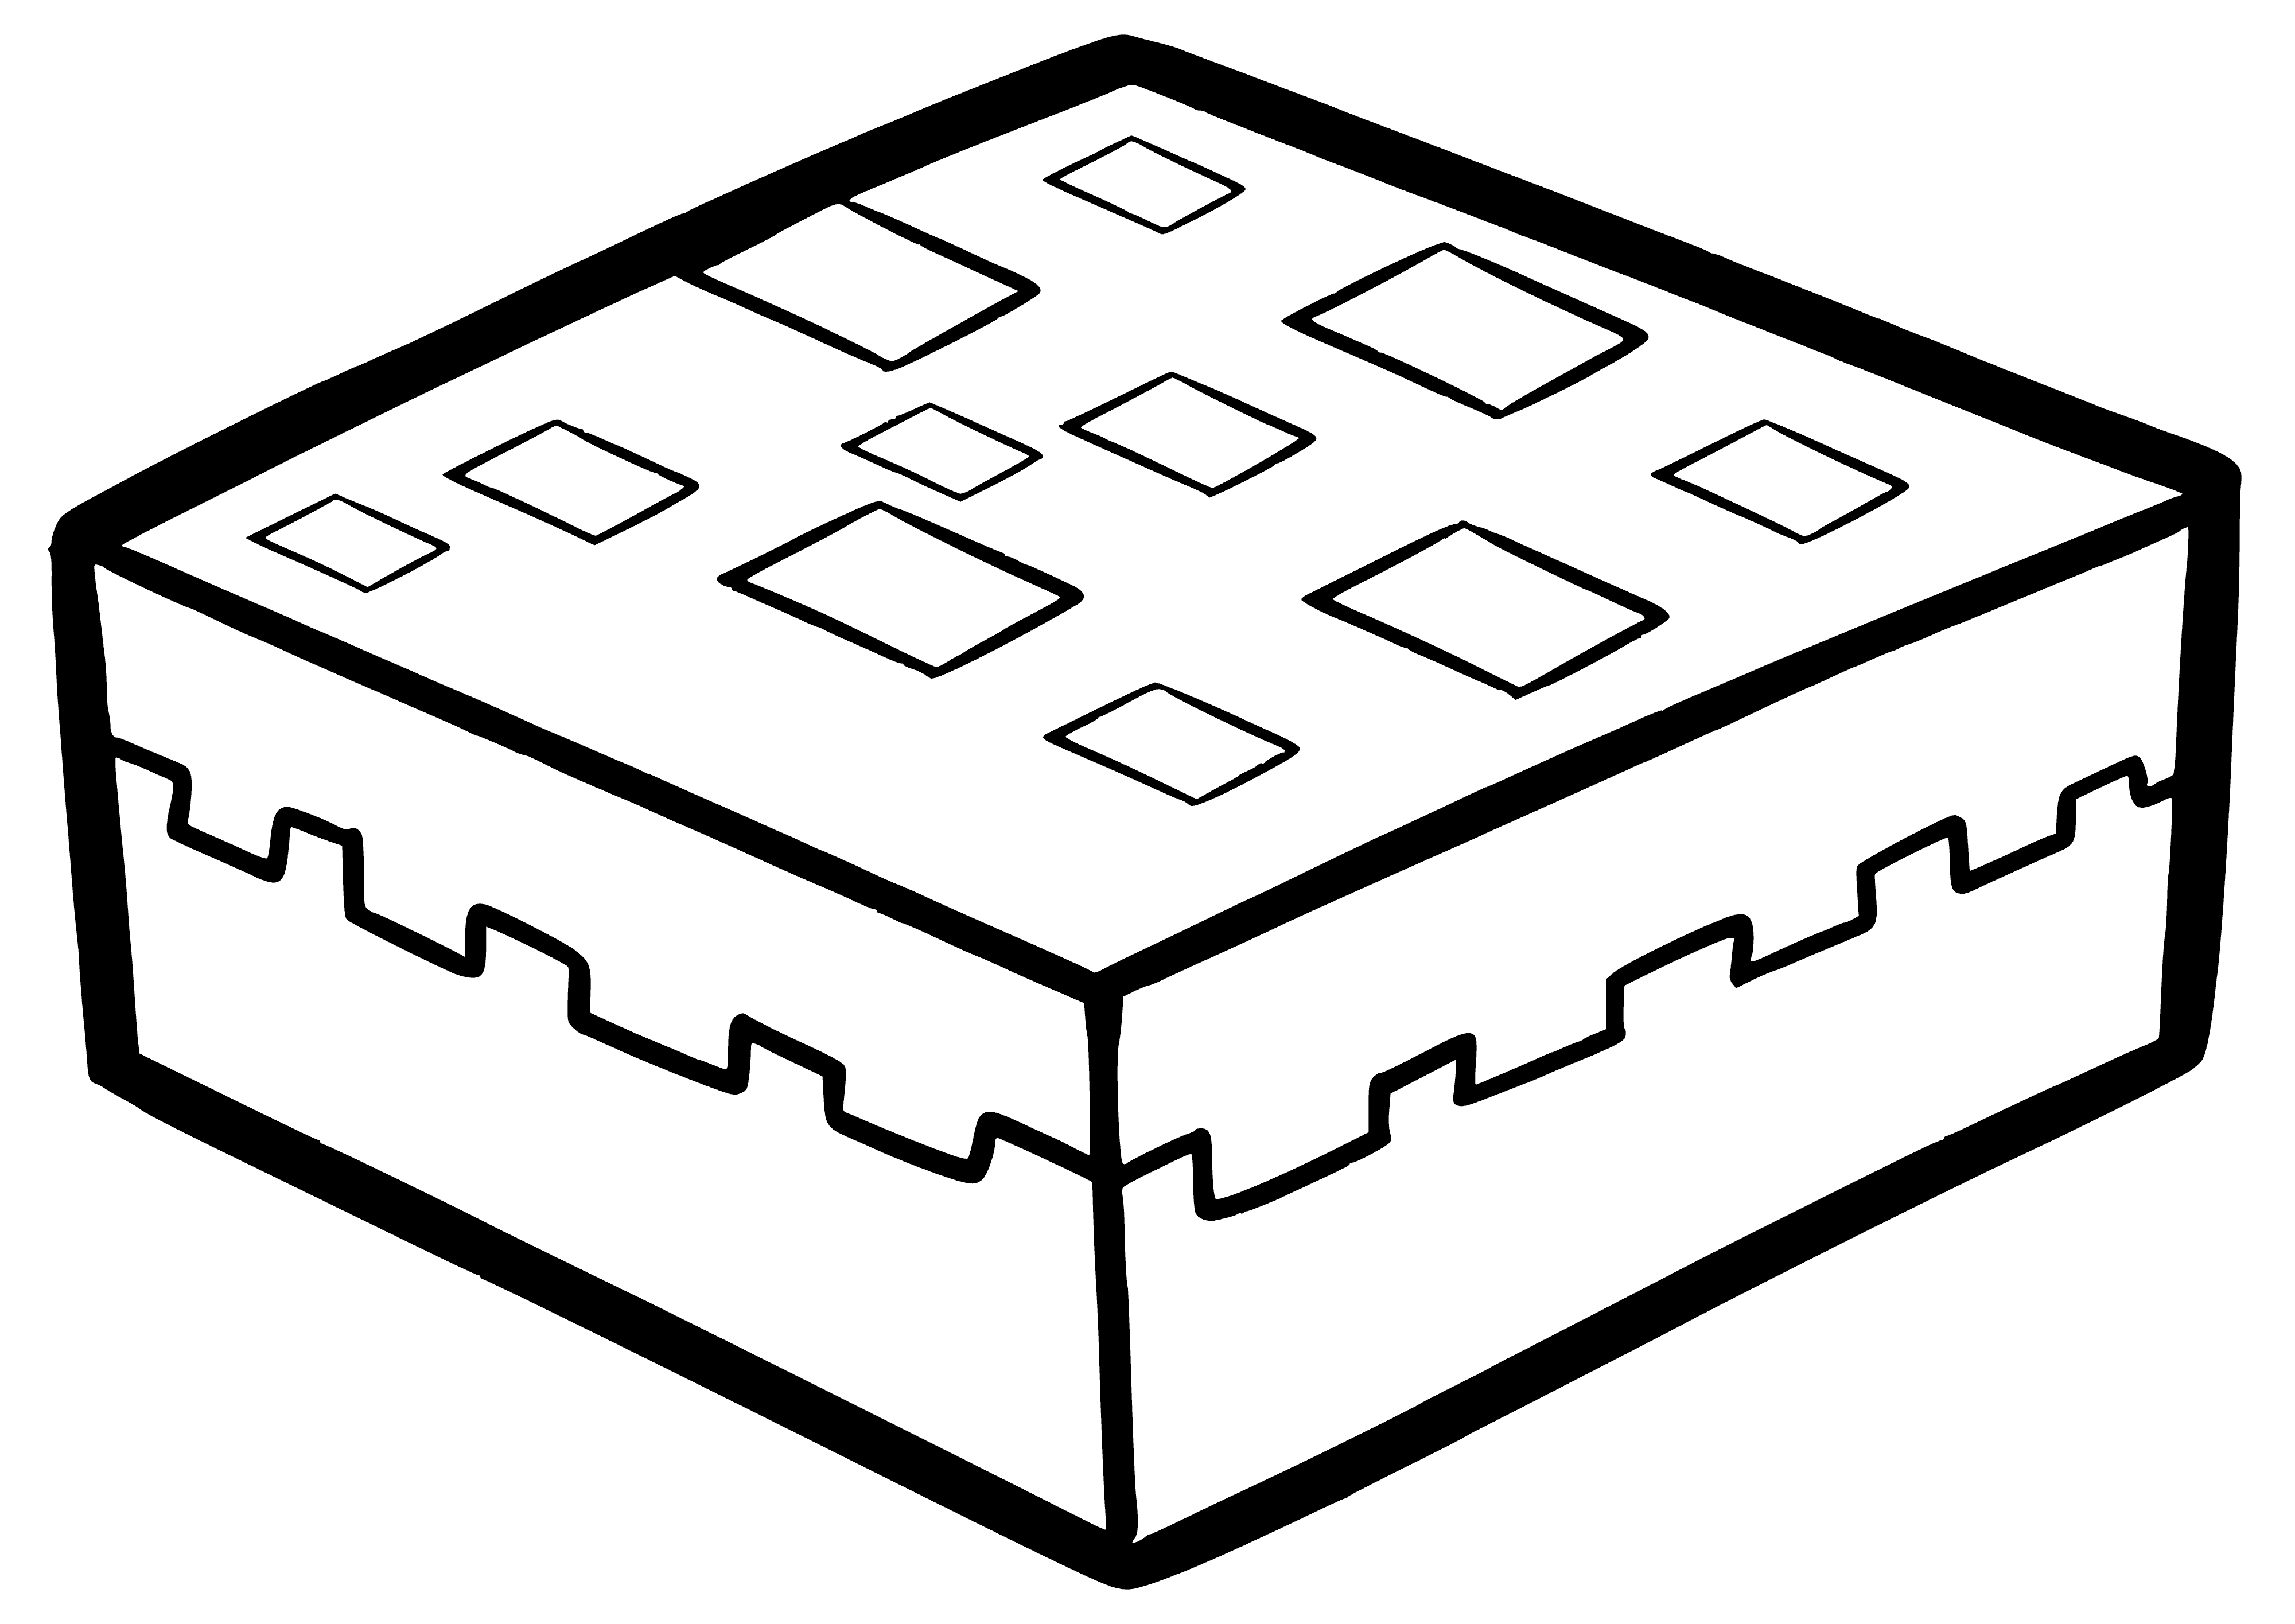 coloring page: Rectangular cake w/ light brown frosting & grass-like sprinkles. "Minecraft" in white lettering, yellow block character in center. Decorated w/ green, white & brown fondant - four layers.